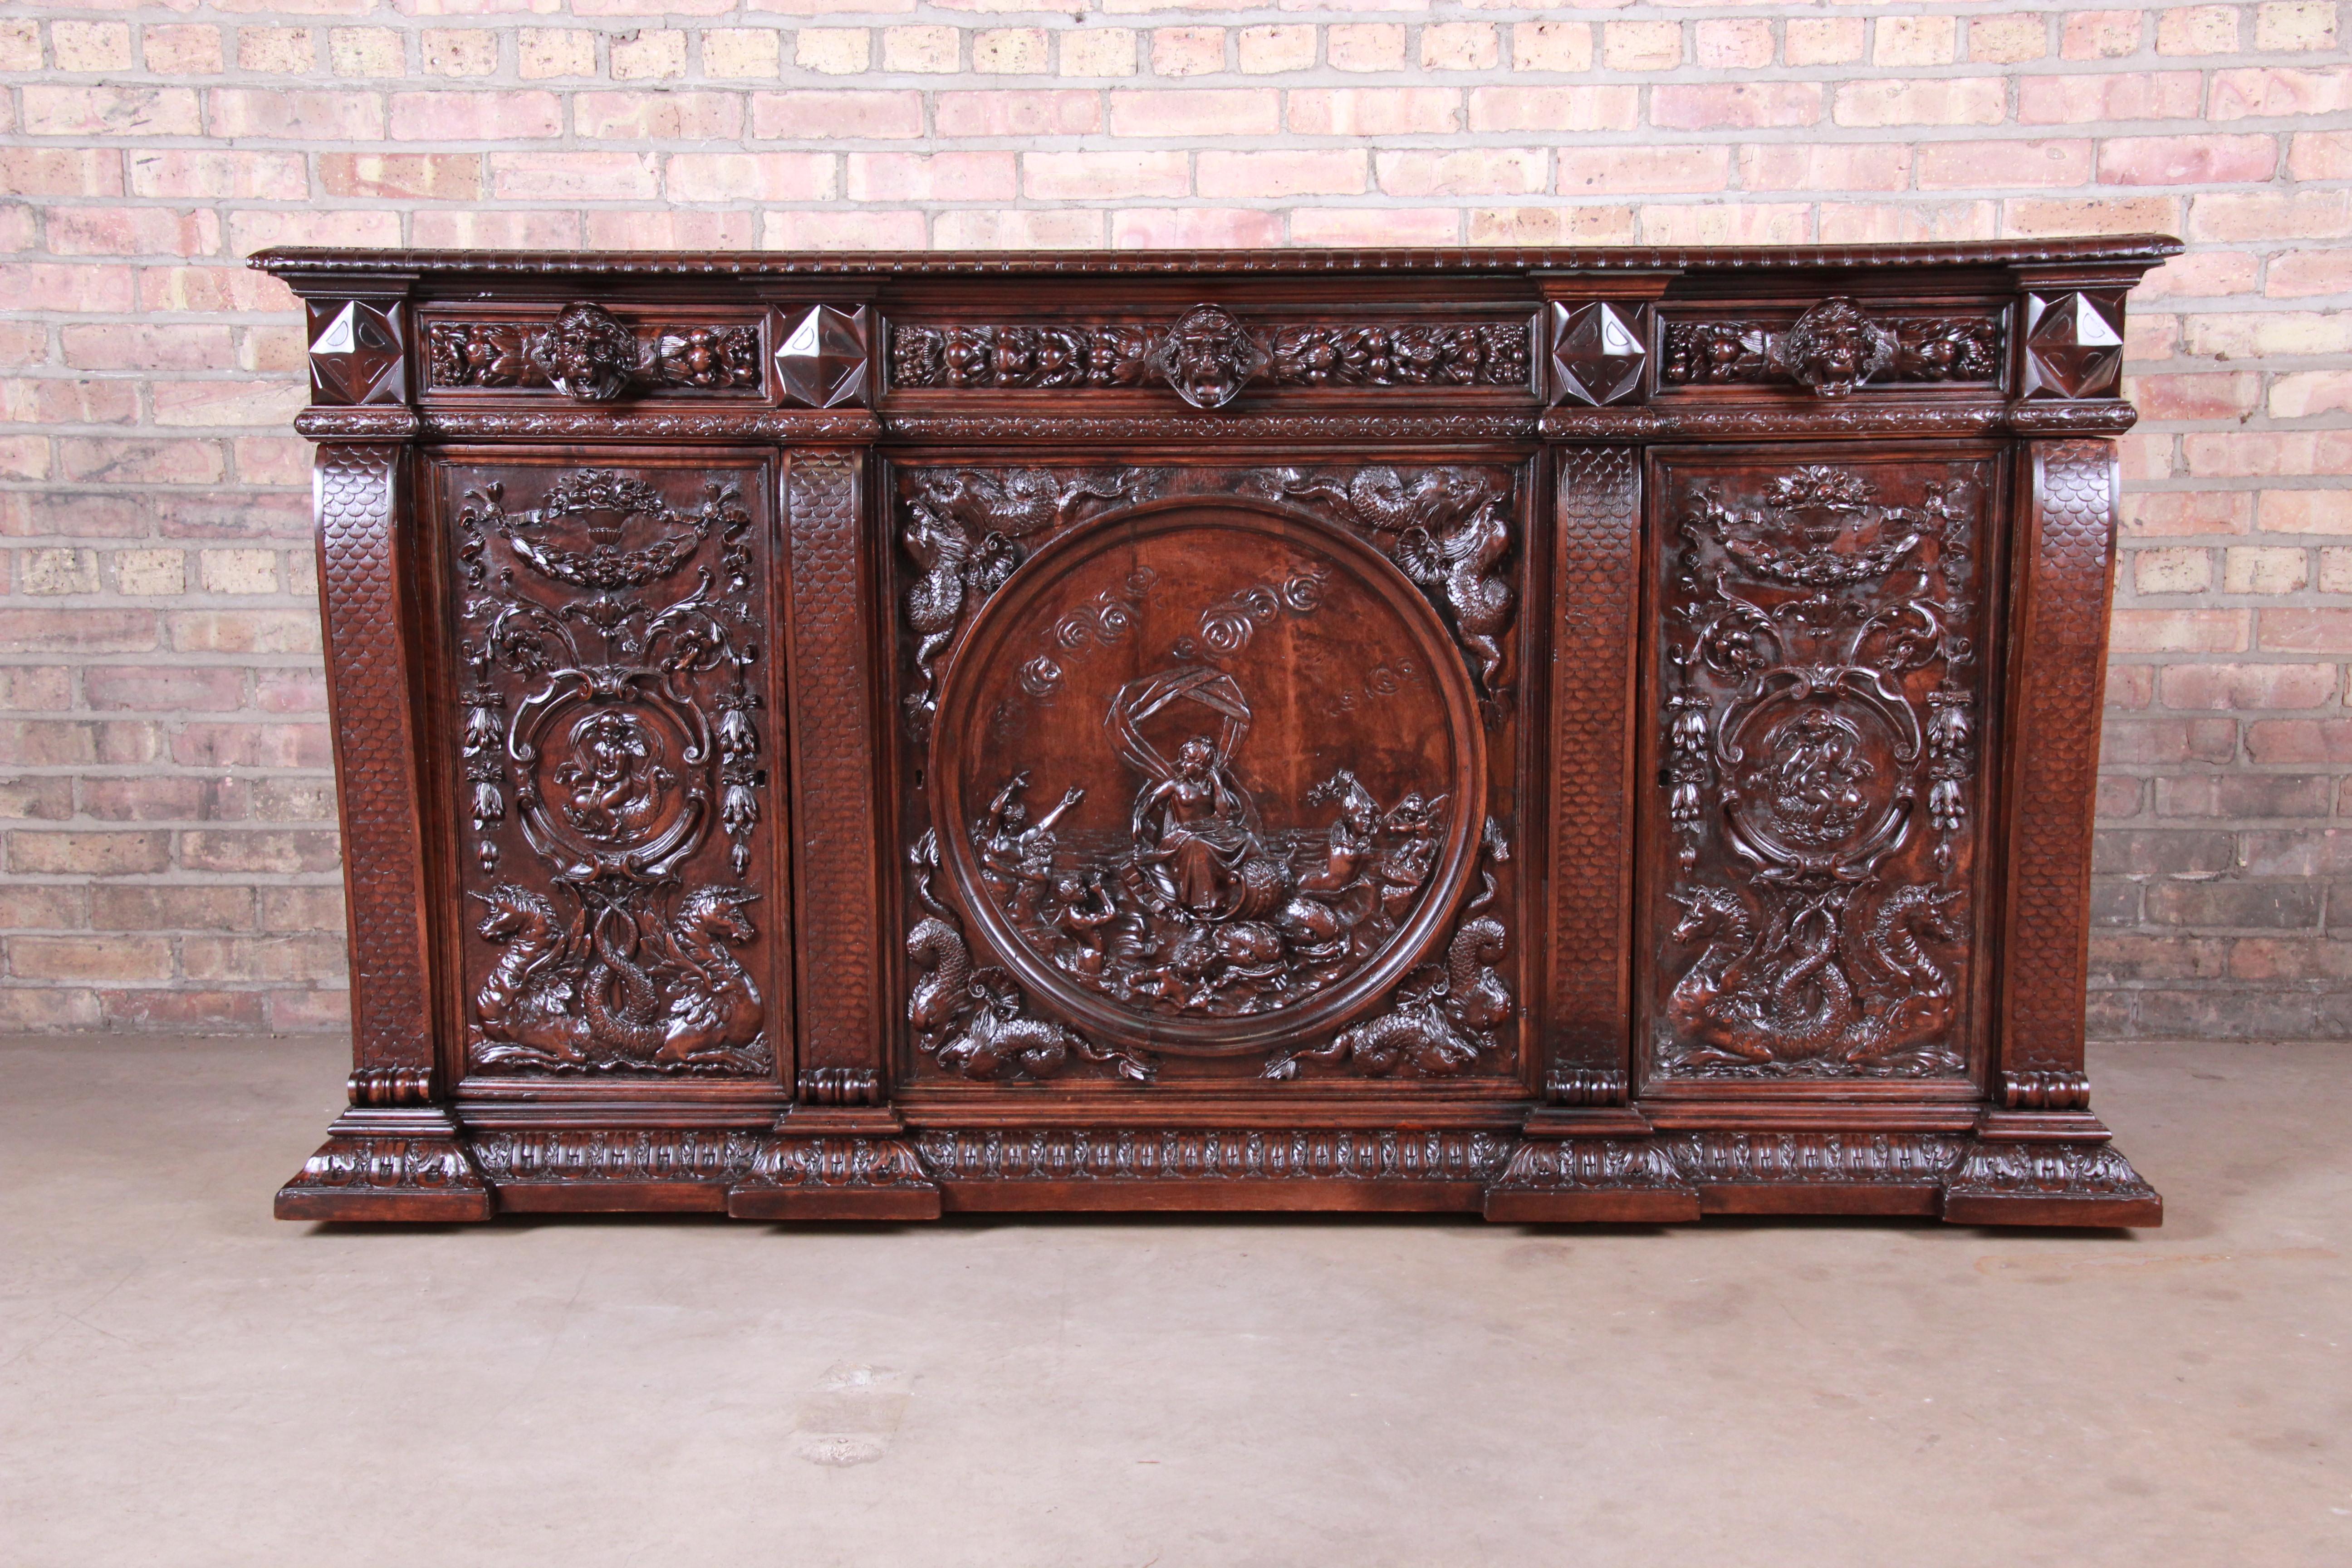 An exceptional ornate carved walnut sideboard credenza or bar cabinet

Attributed to R.J. Horner & Co. of New York

USA, circa 1880s

Measures: 72